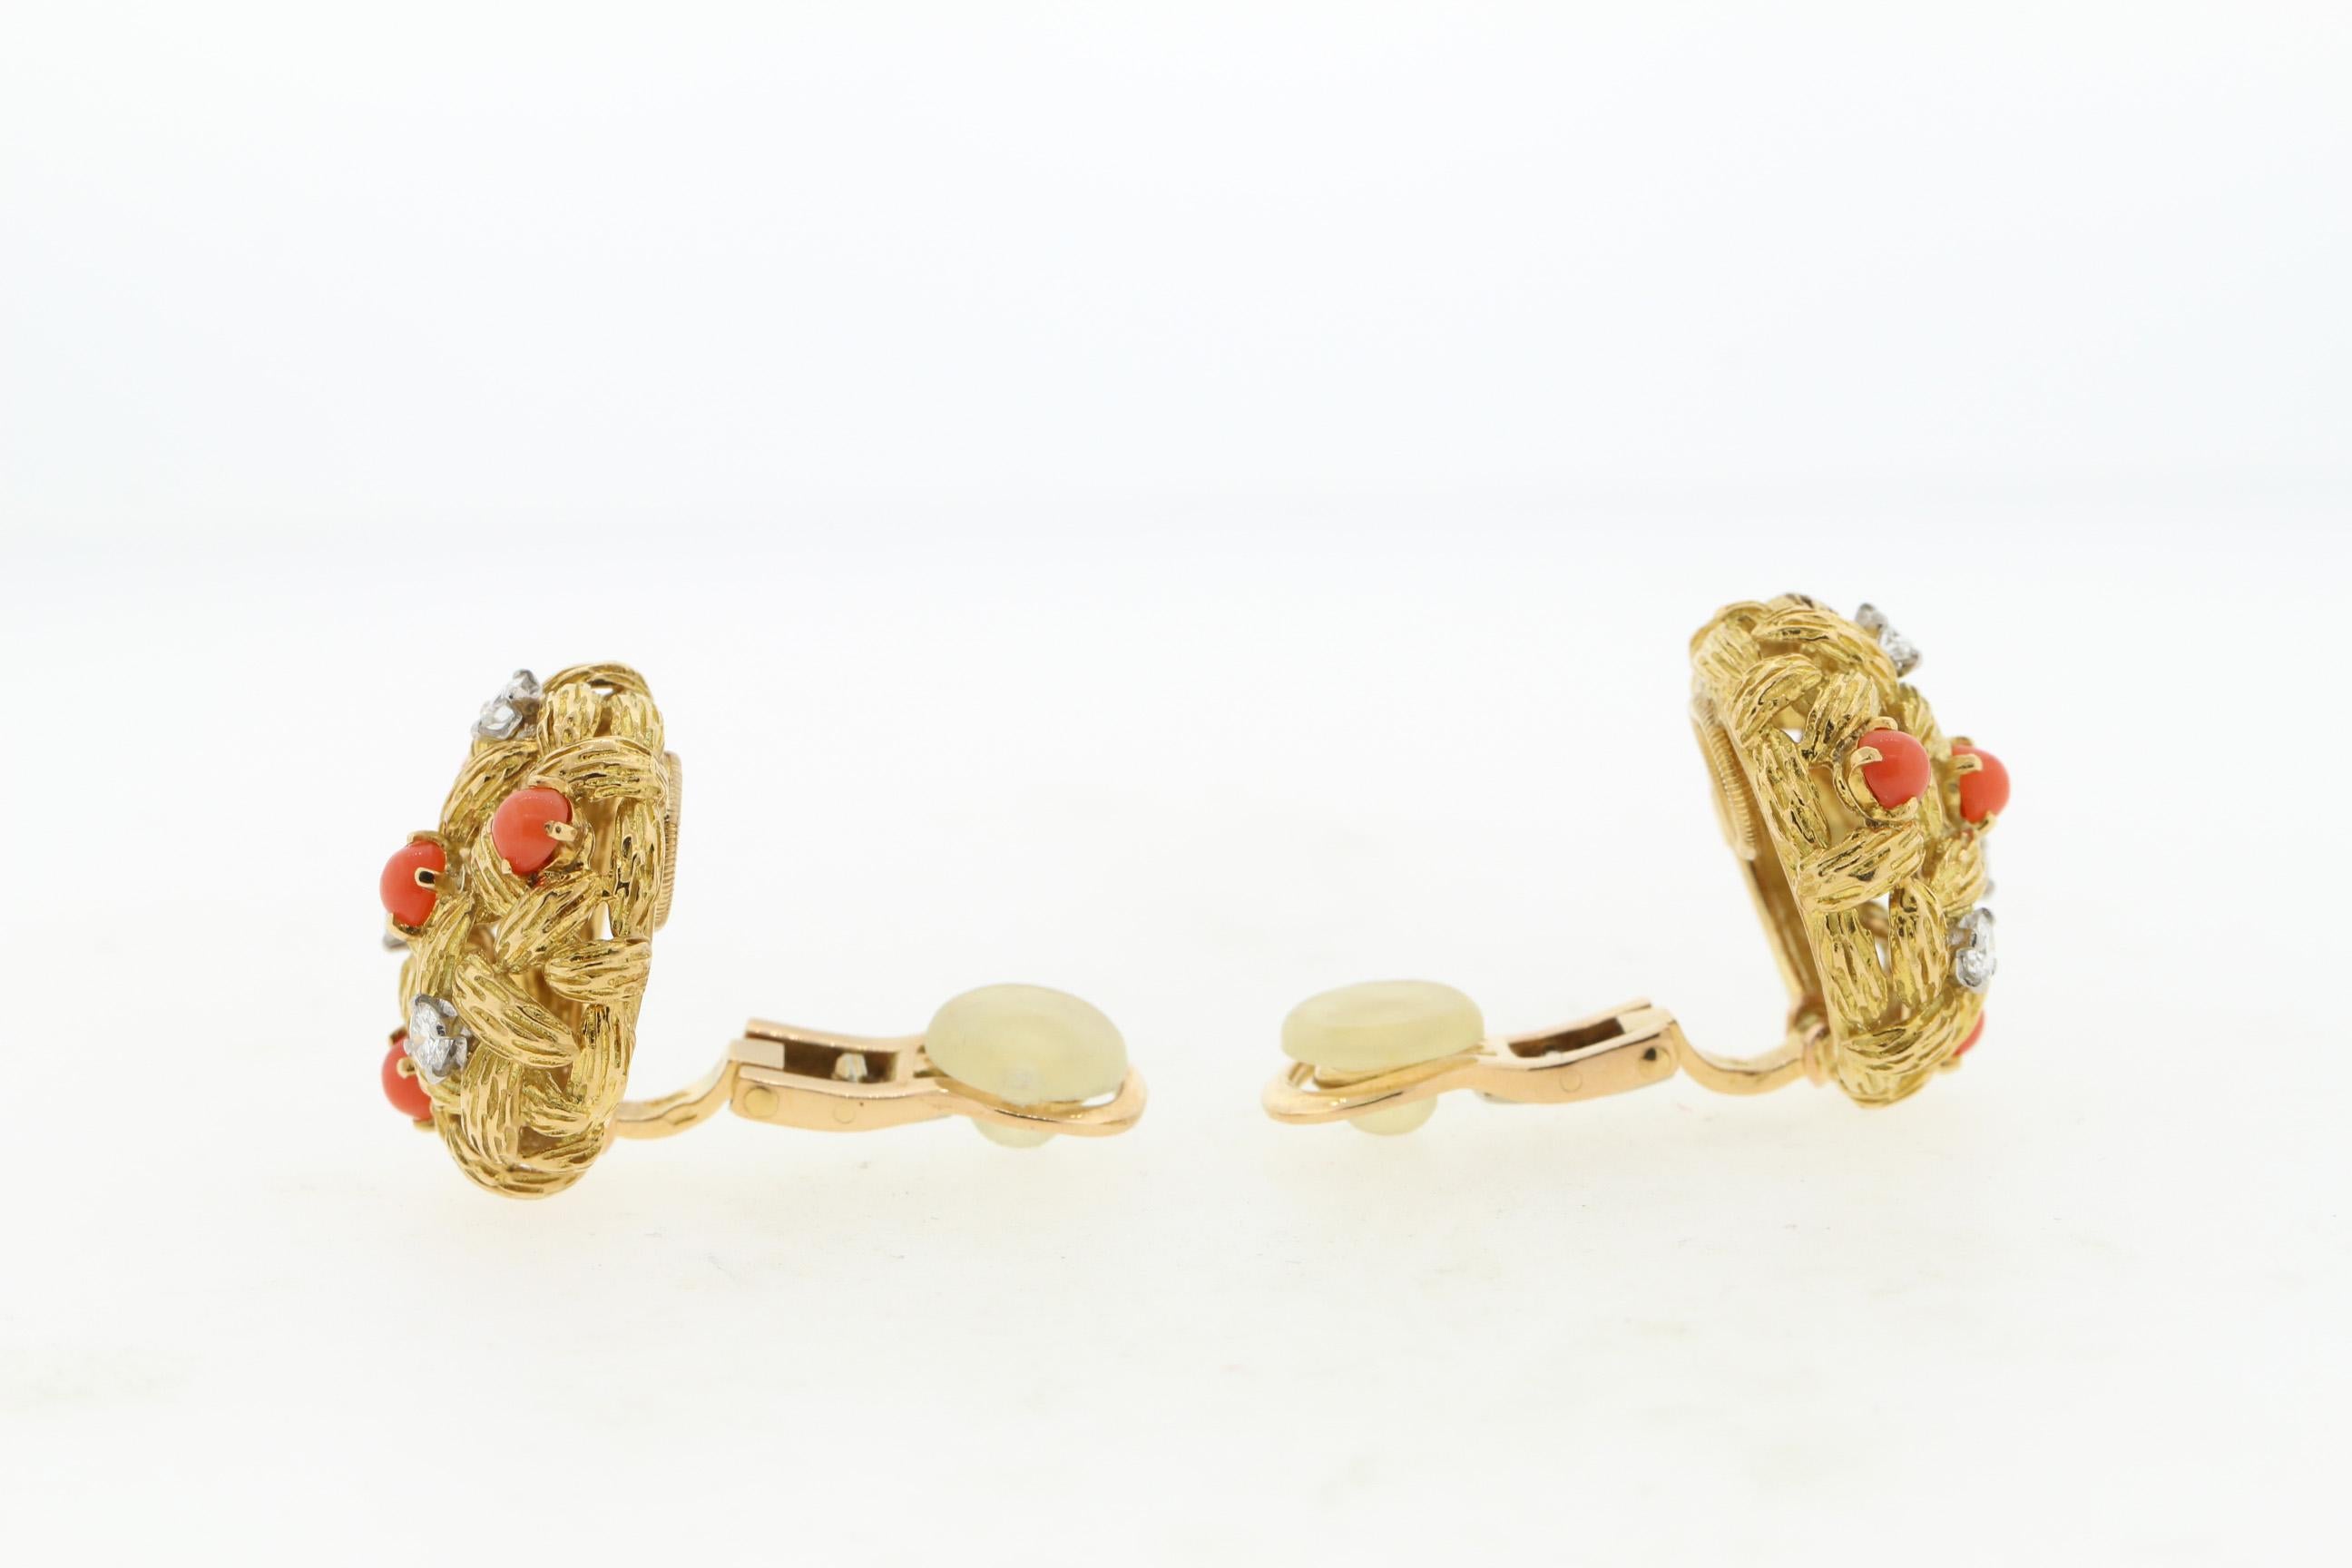 Vintage round textured 18k yellow gold ear clips set with coral and diamonds by Mauboussin, circa 1960. These fun button earrings have a basketweave design with braided gold. They are set with round coral and 6 diamonds weighing approximately 0.24